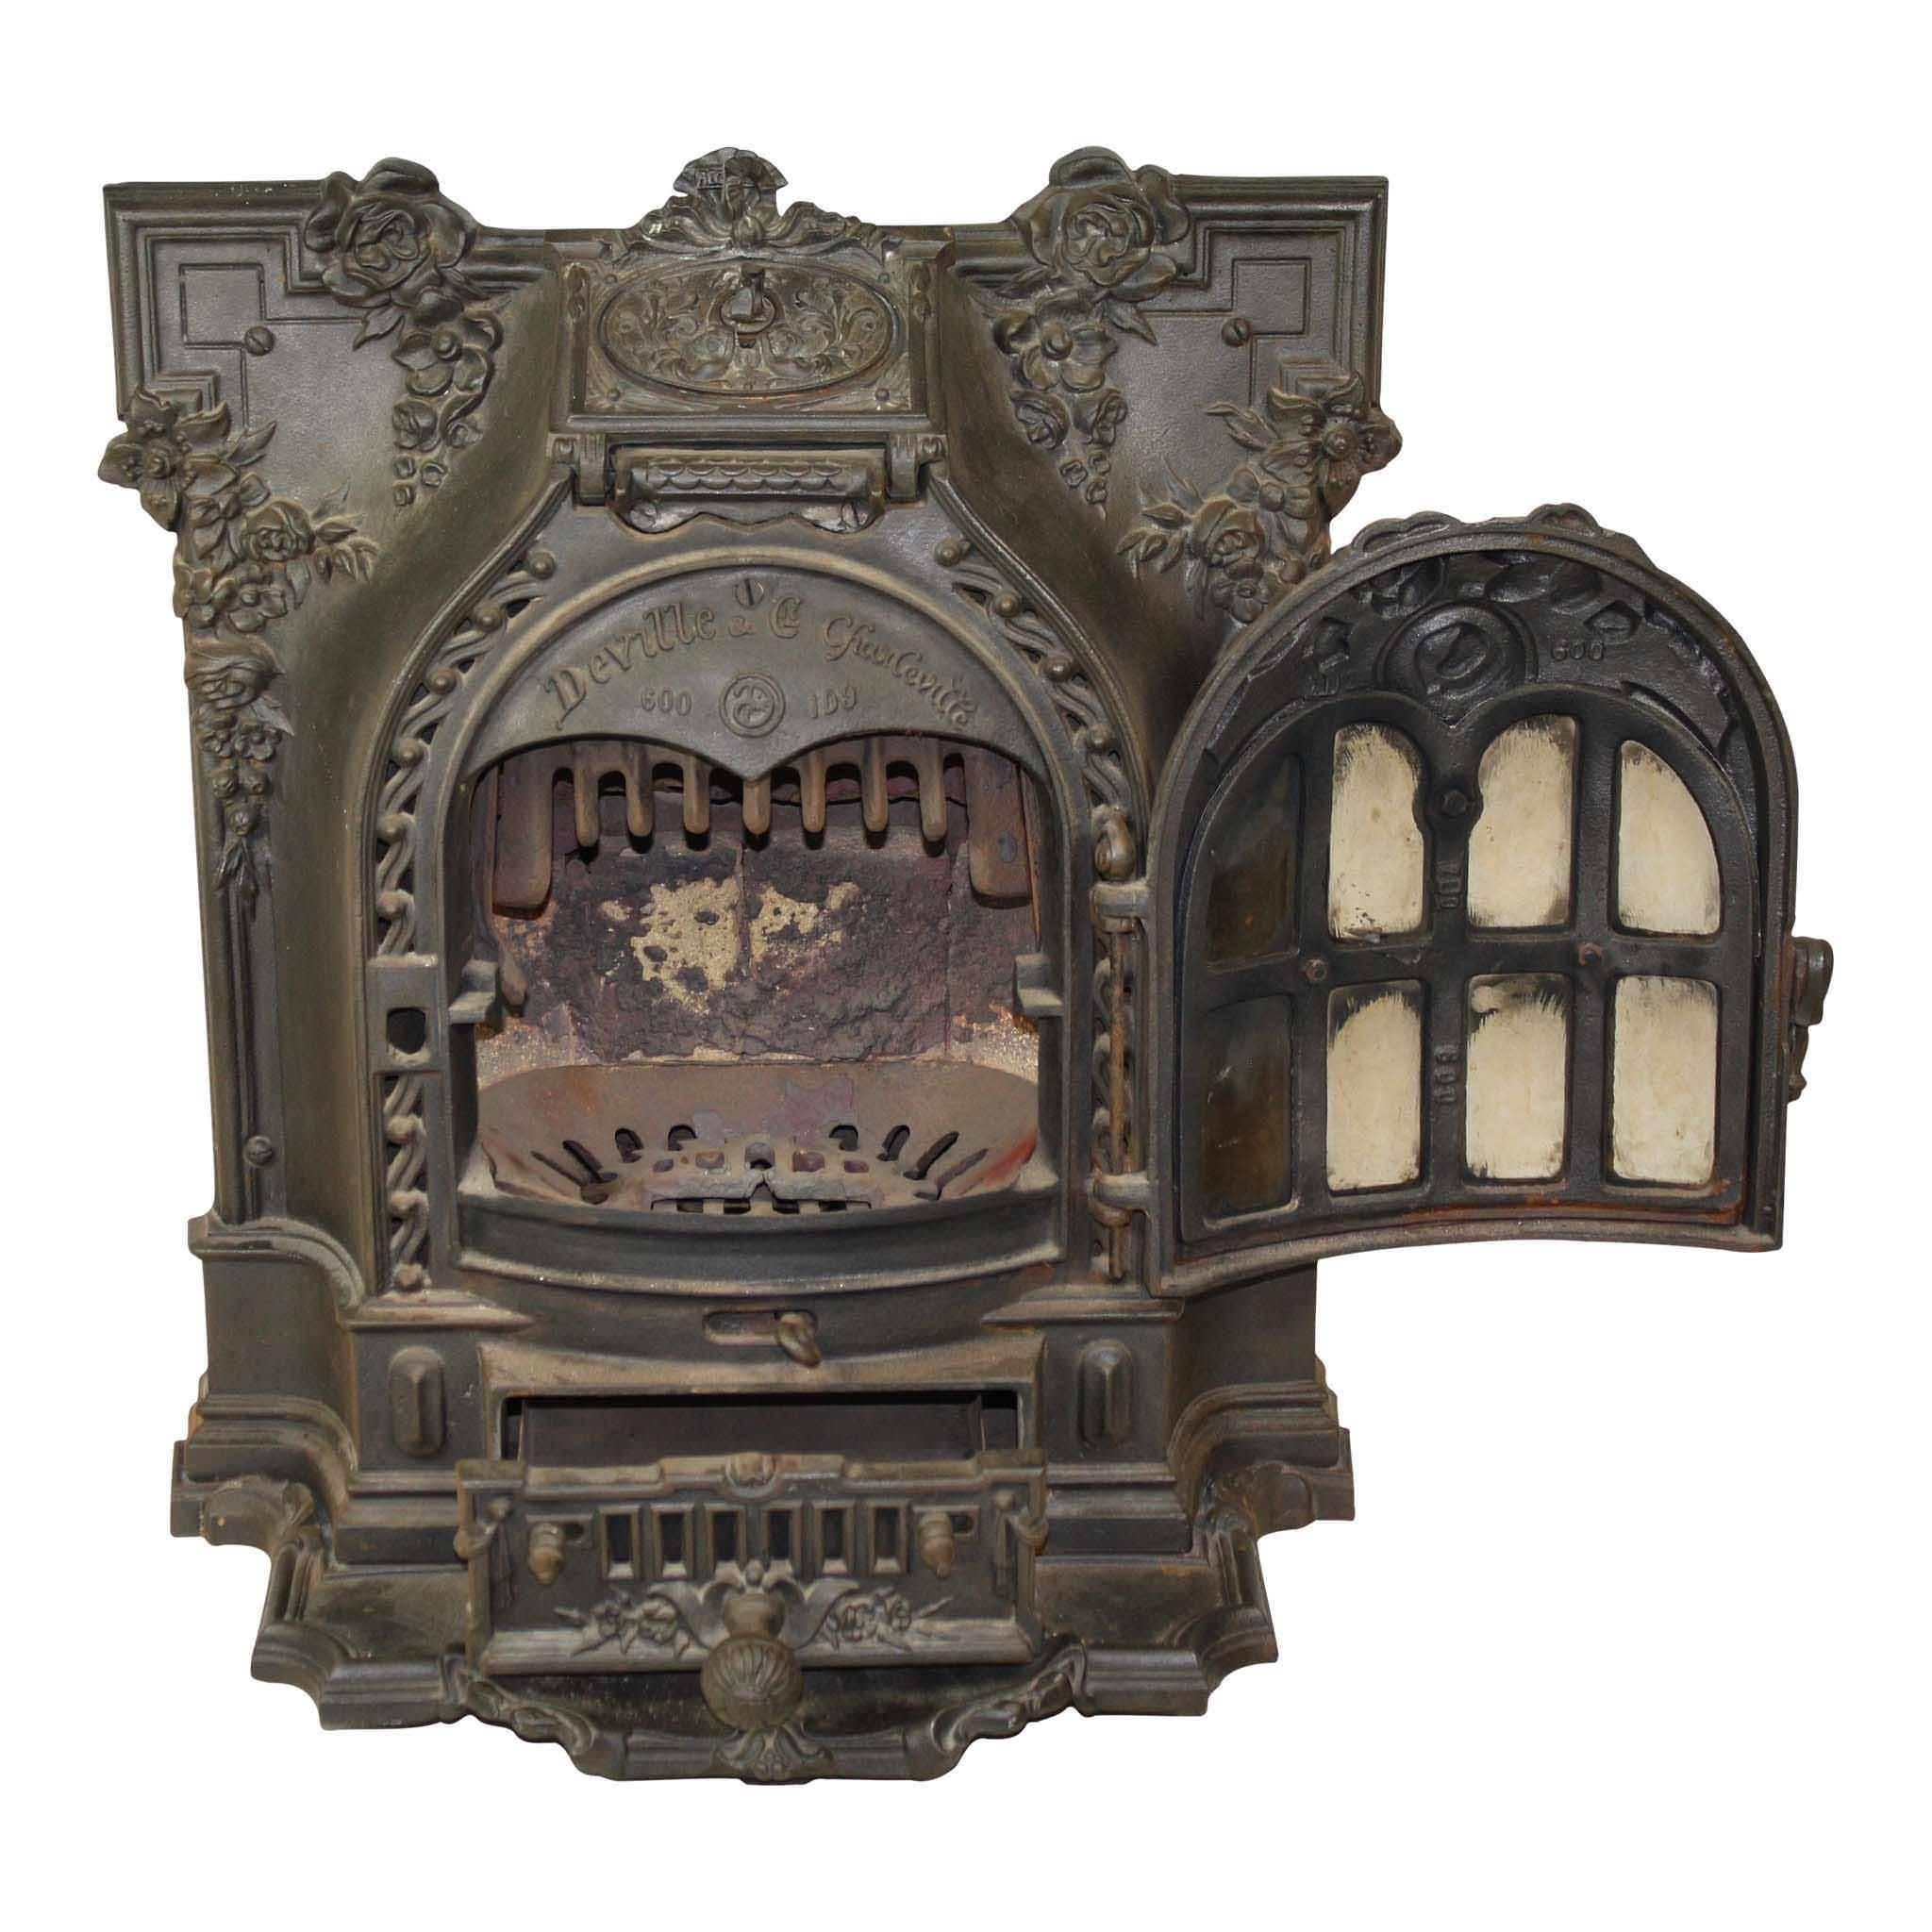 This stove was manufactured by Deville & Cie in Charleville in the Ardennes. The company grew famous in France for the styling and quality of their stoves, which where manufactured at their original foundry established in 1848 by the Corneau